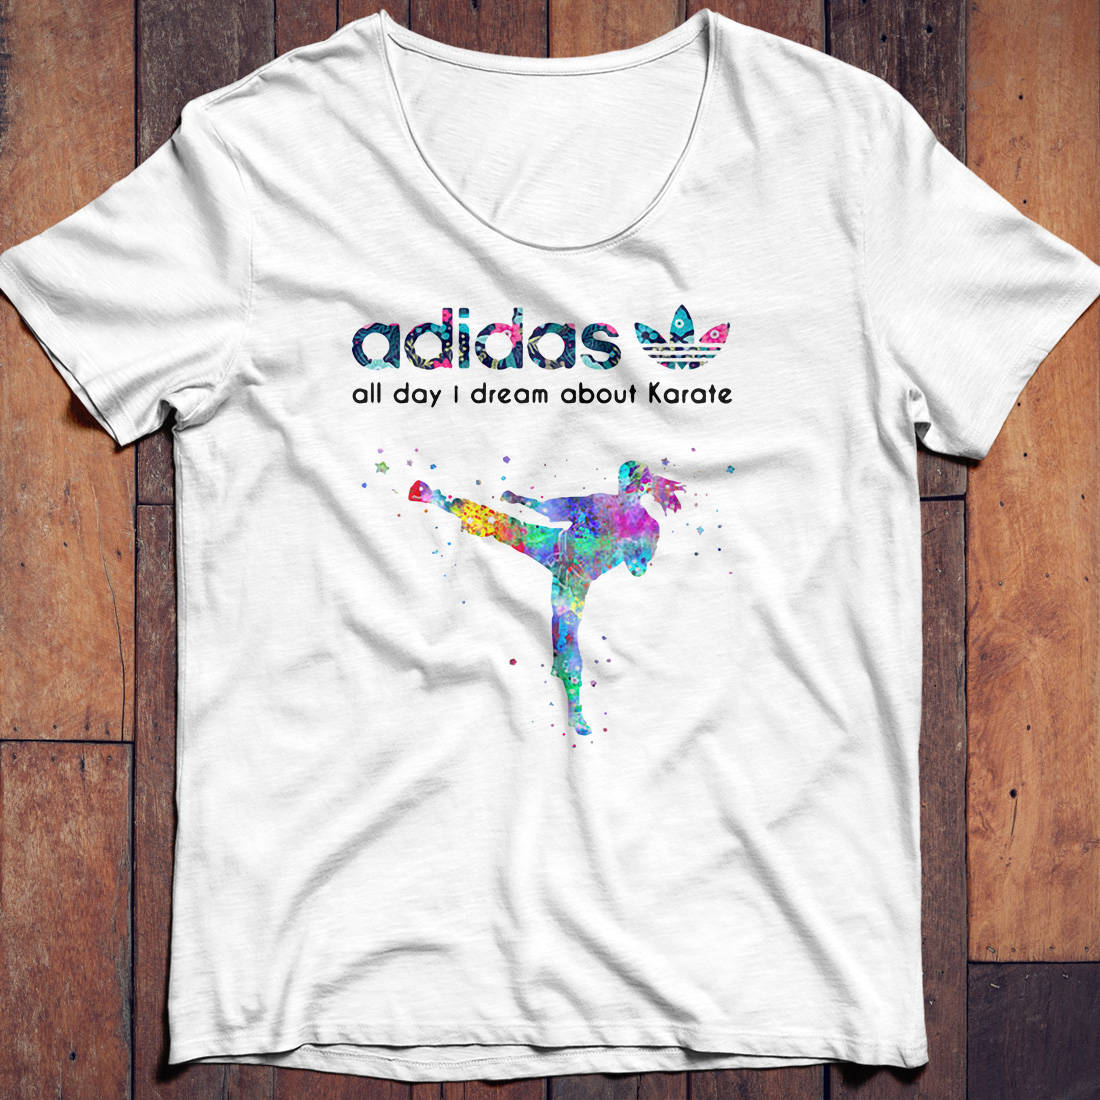 Es mas que brillo eficiencia Adidas all day I dream about Karate shirt, hoodie and sweater